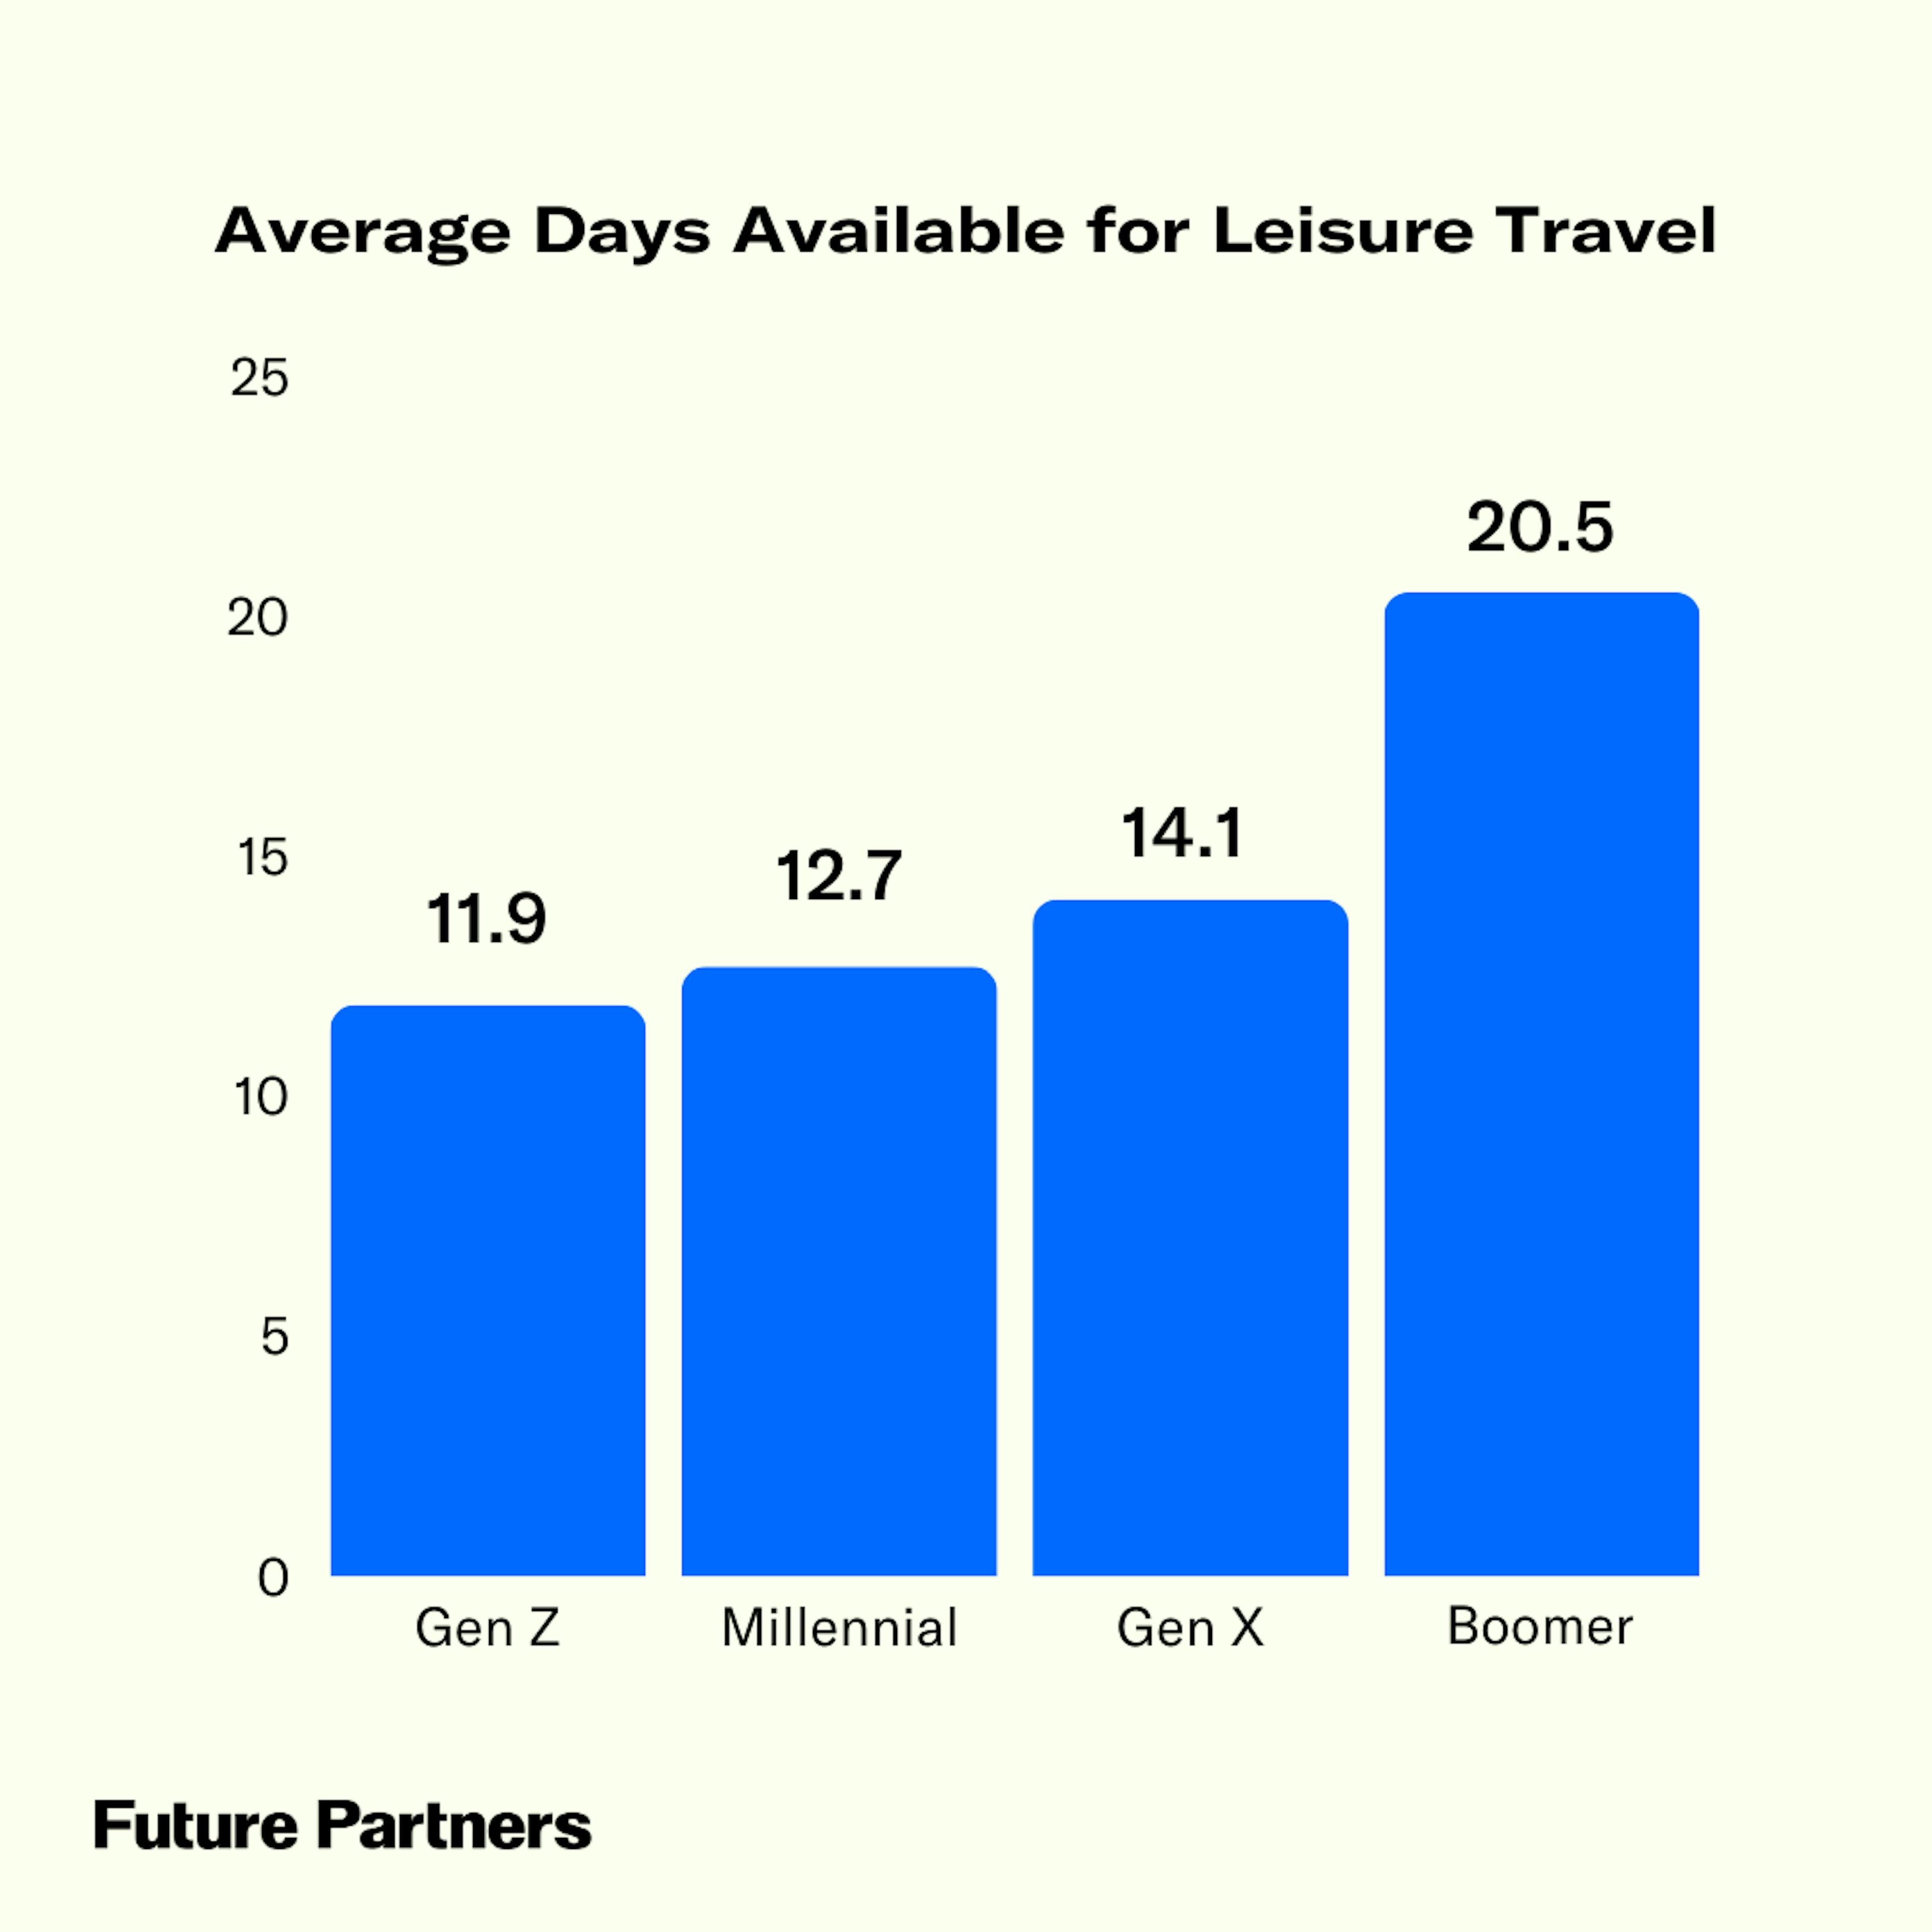 Gen Z expects to have 11.9 days available for leisure travel, while Boomers have 20.5.